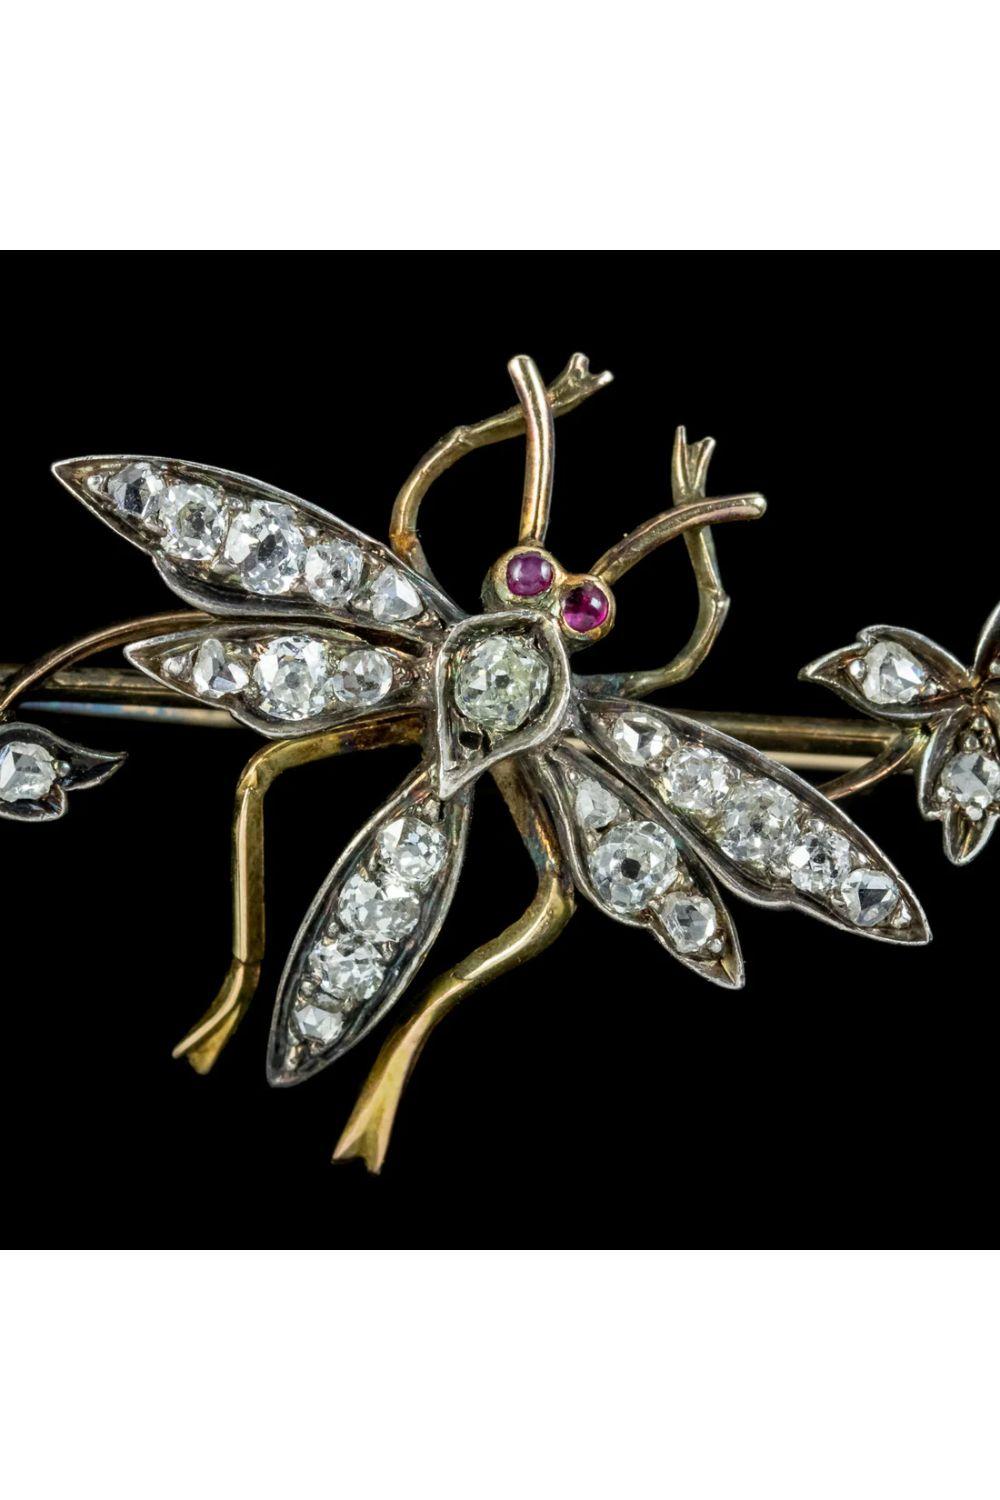 Antique Victorian Diamond Insect Brooch Silver 18 Carat Gold, circa 1900 In Good Condition For Sale In Kendal, GB